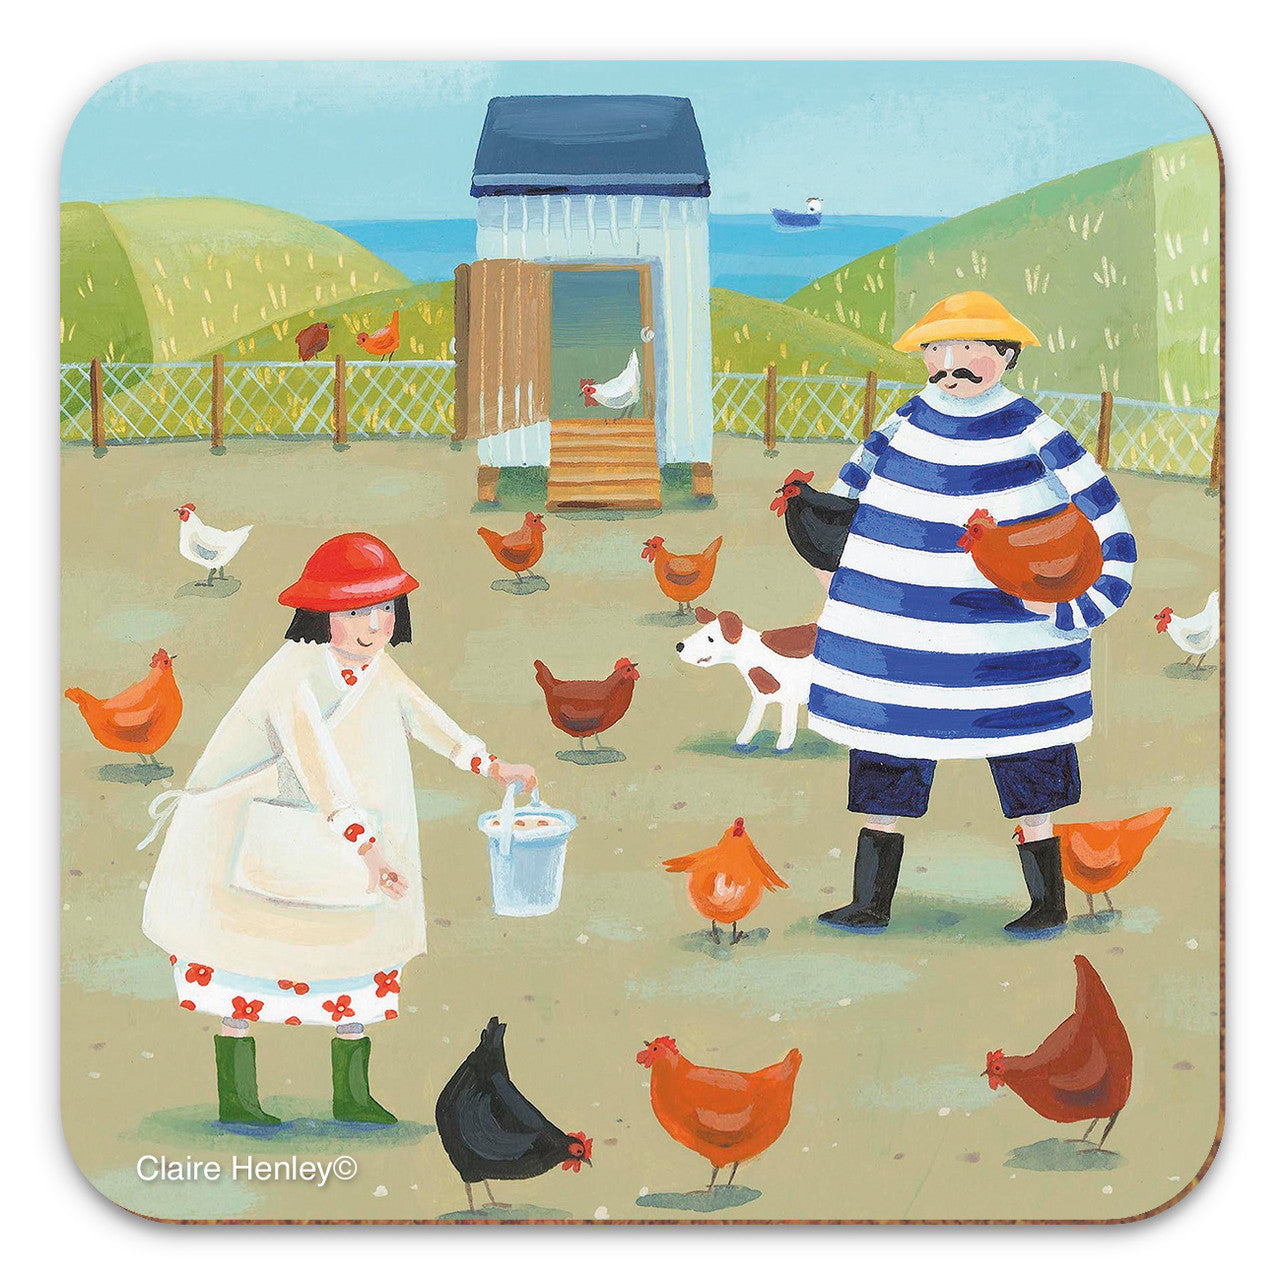 Feeding the Chickens Coaster by Claire Henley for Emma Ball.